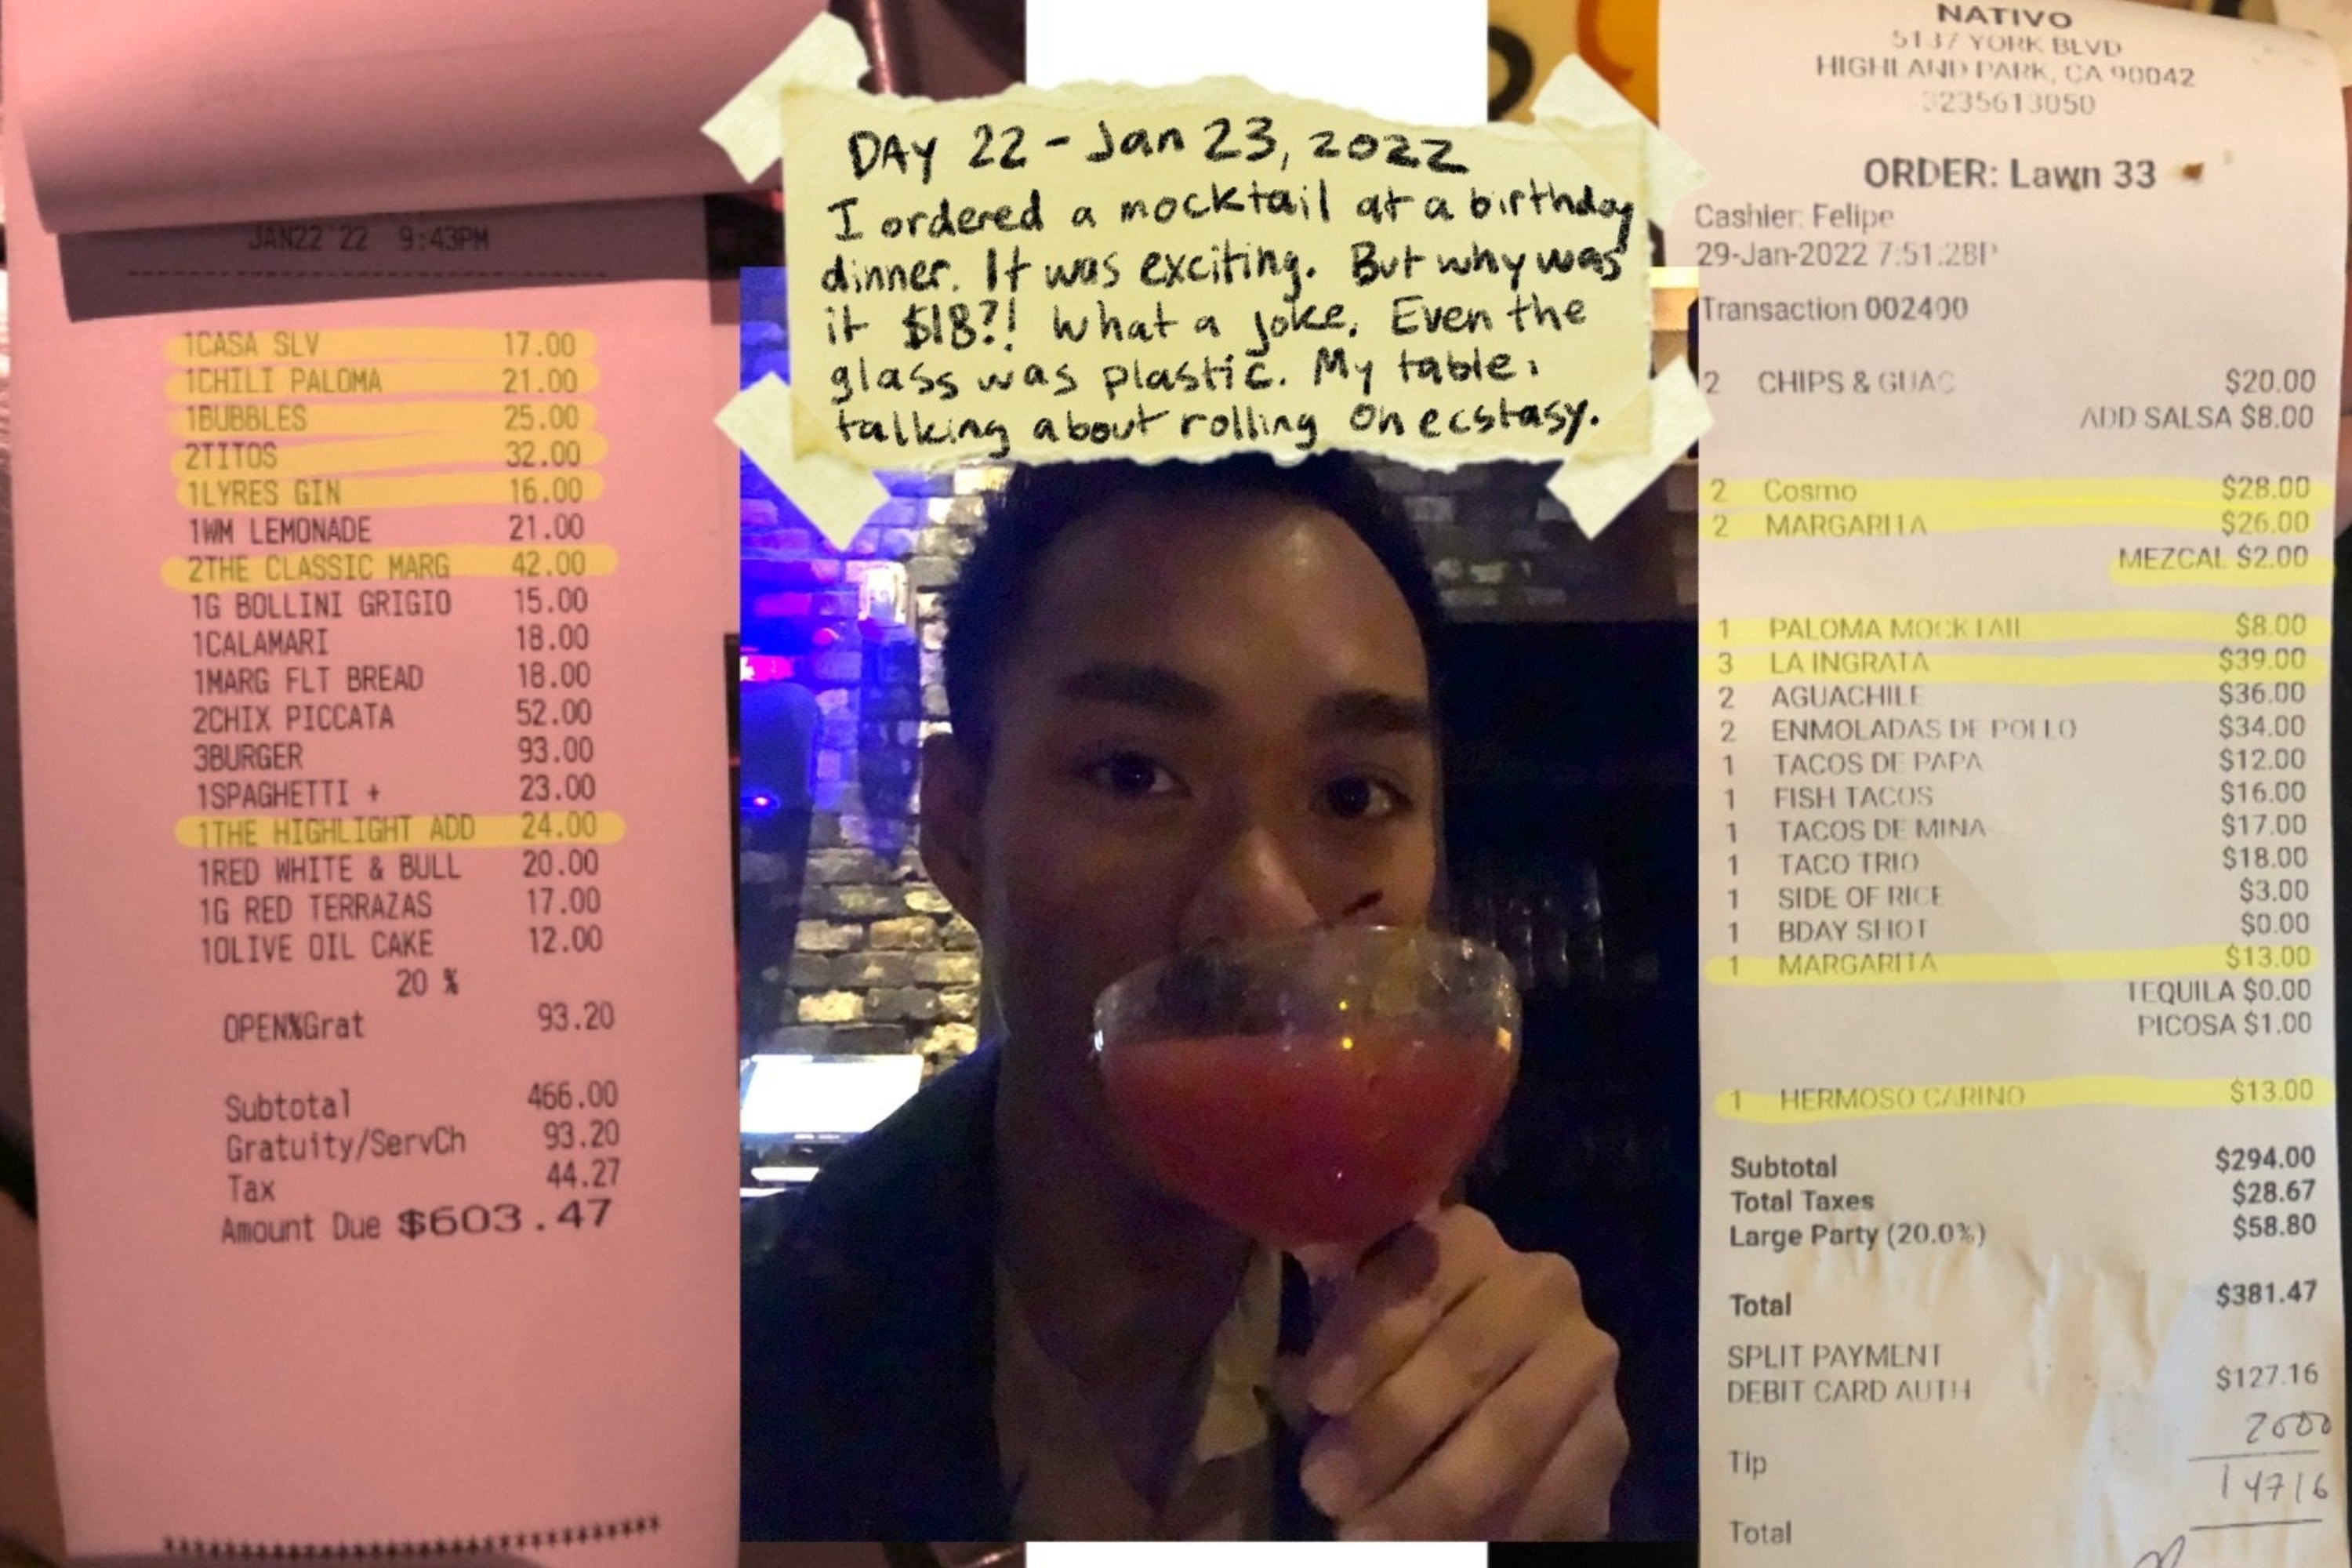 Author drinking a $18 mocktail accompanied with receipts, one totaling over $600 and the other over $380 with the alcoholic items highlighted